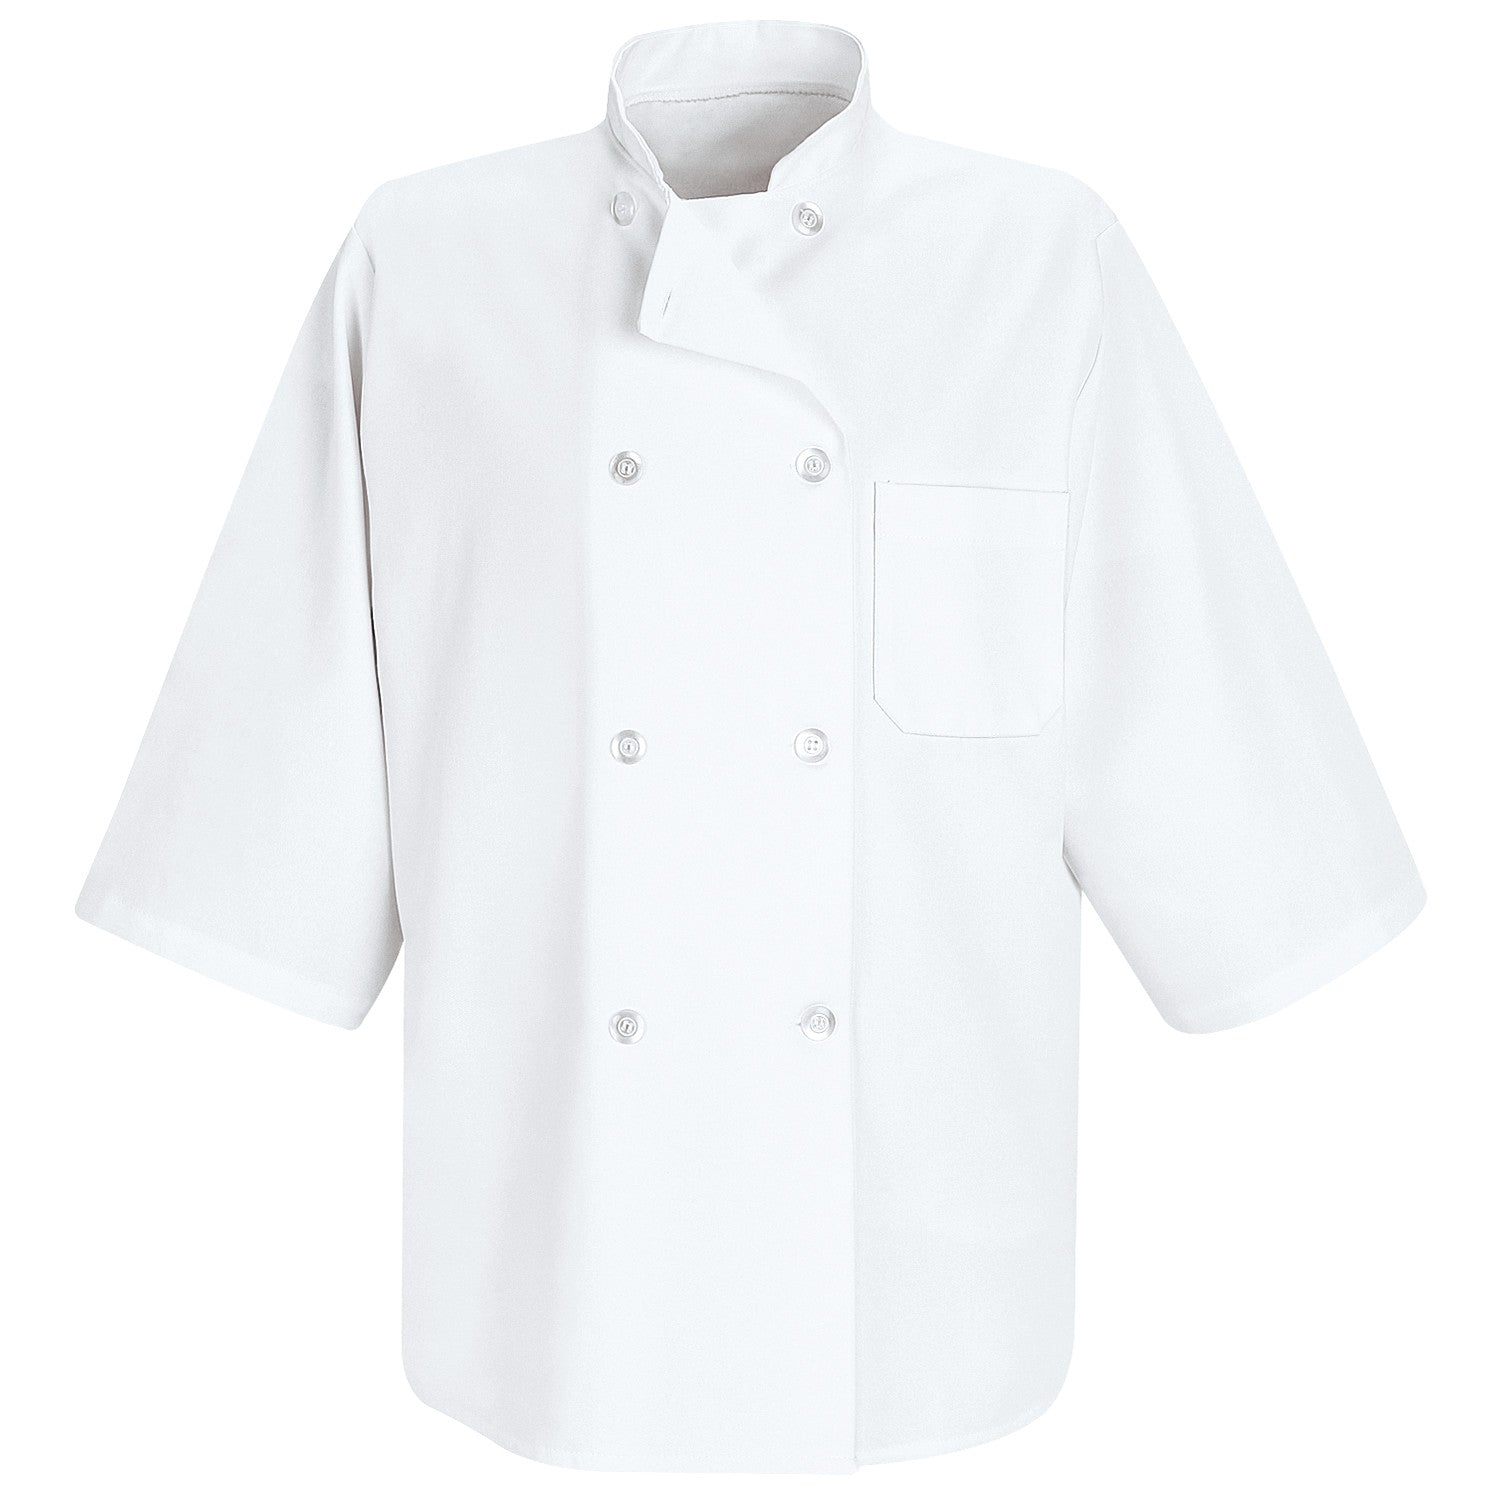 ½ Sleeve Chef Coat 0404 - White-eSafety Supplies, Inc